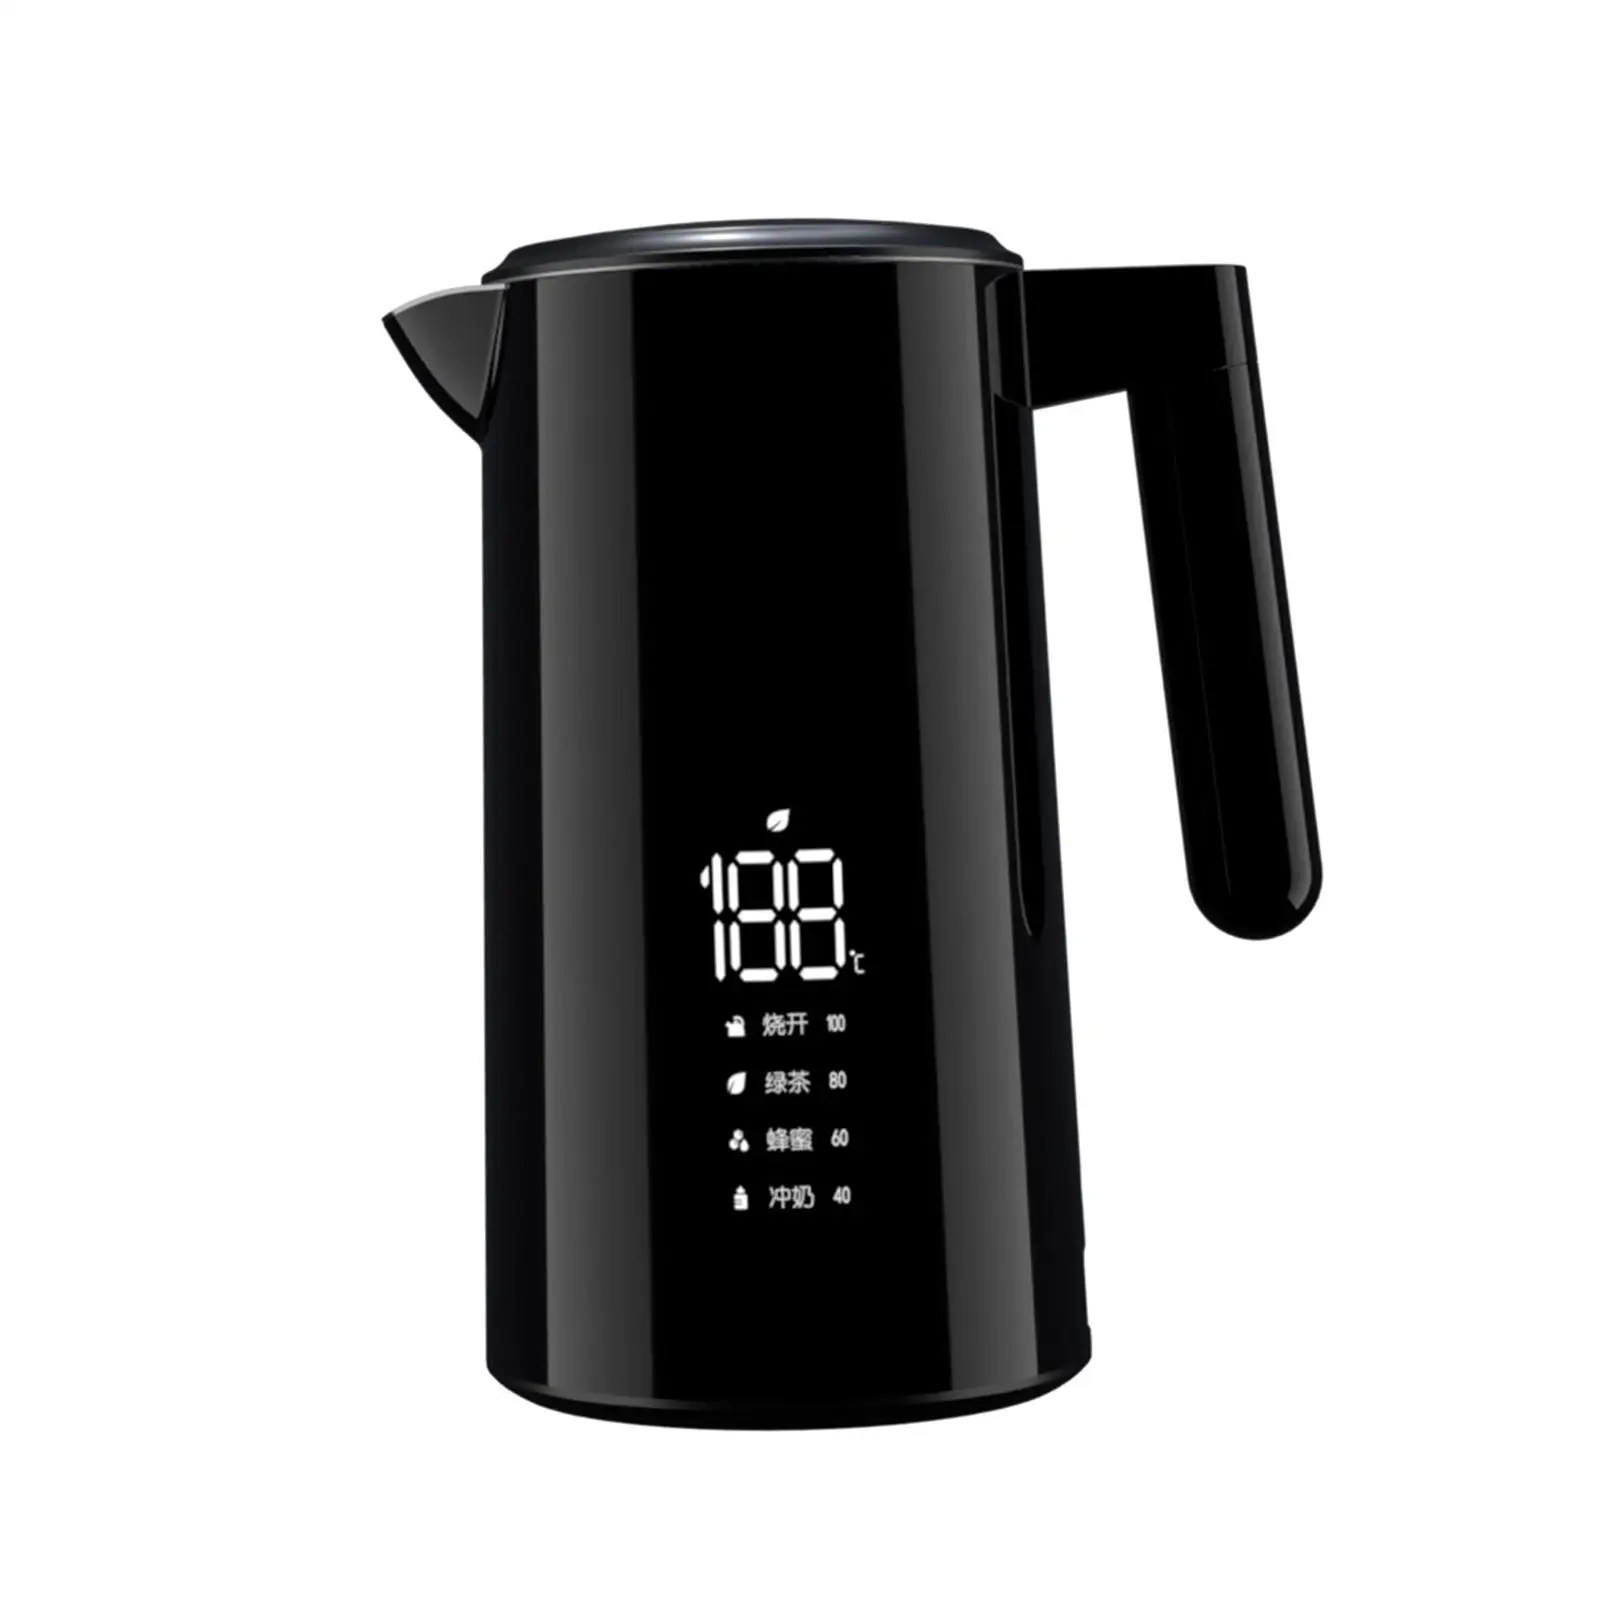 Portable Car Kettle Boiler 12V 24V Stainless Steel Temperature Display 1.2L Insulated Heater Cup for Coffee Outdoor Travel